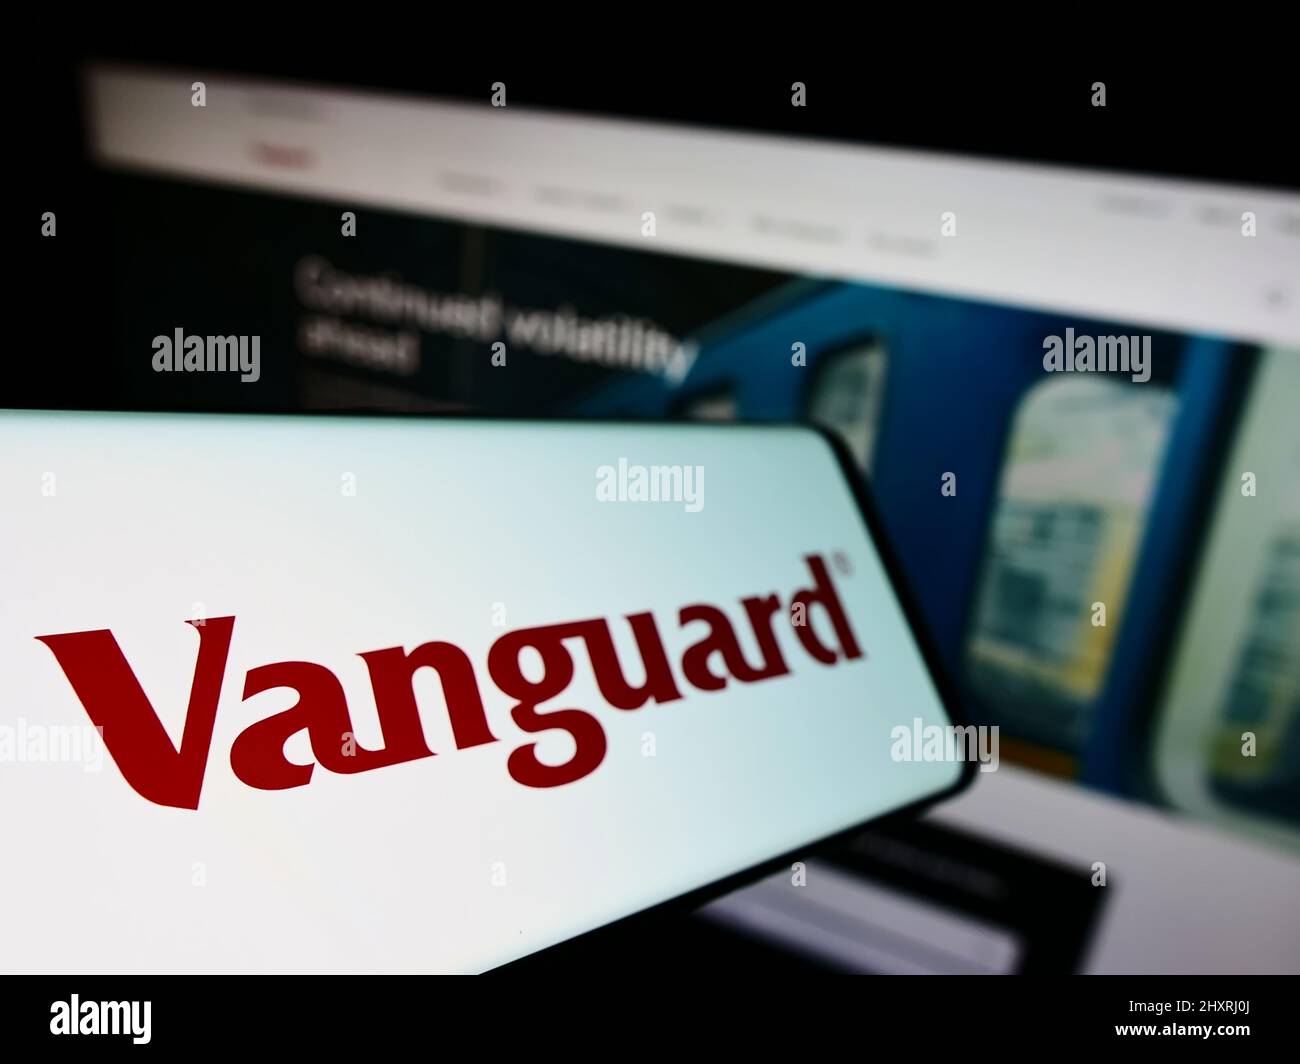 Smartphone with logo of American financial company The Vanguard Group Inc. on screen in front of business website. Focus on left of phone display. Stock Photo